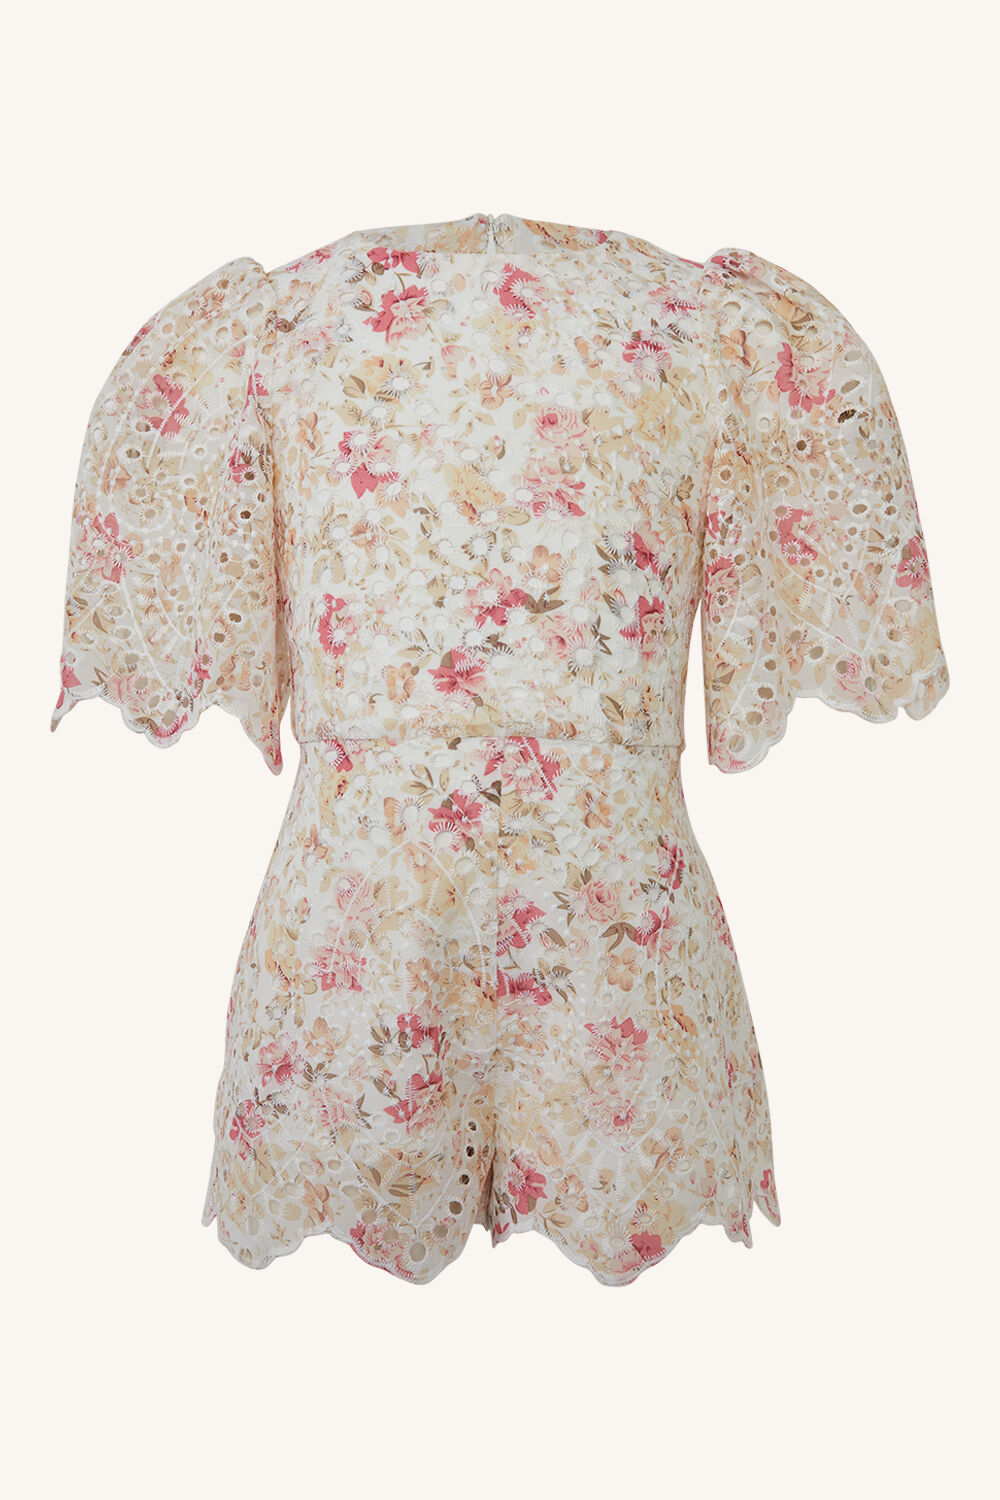 GIRLS AMELIA FLORAL PLAYSUIT in colour SACHET PINK